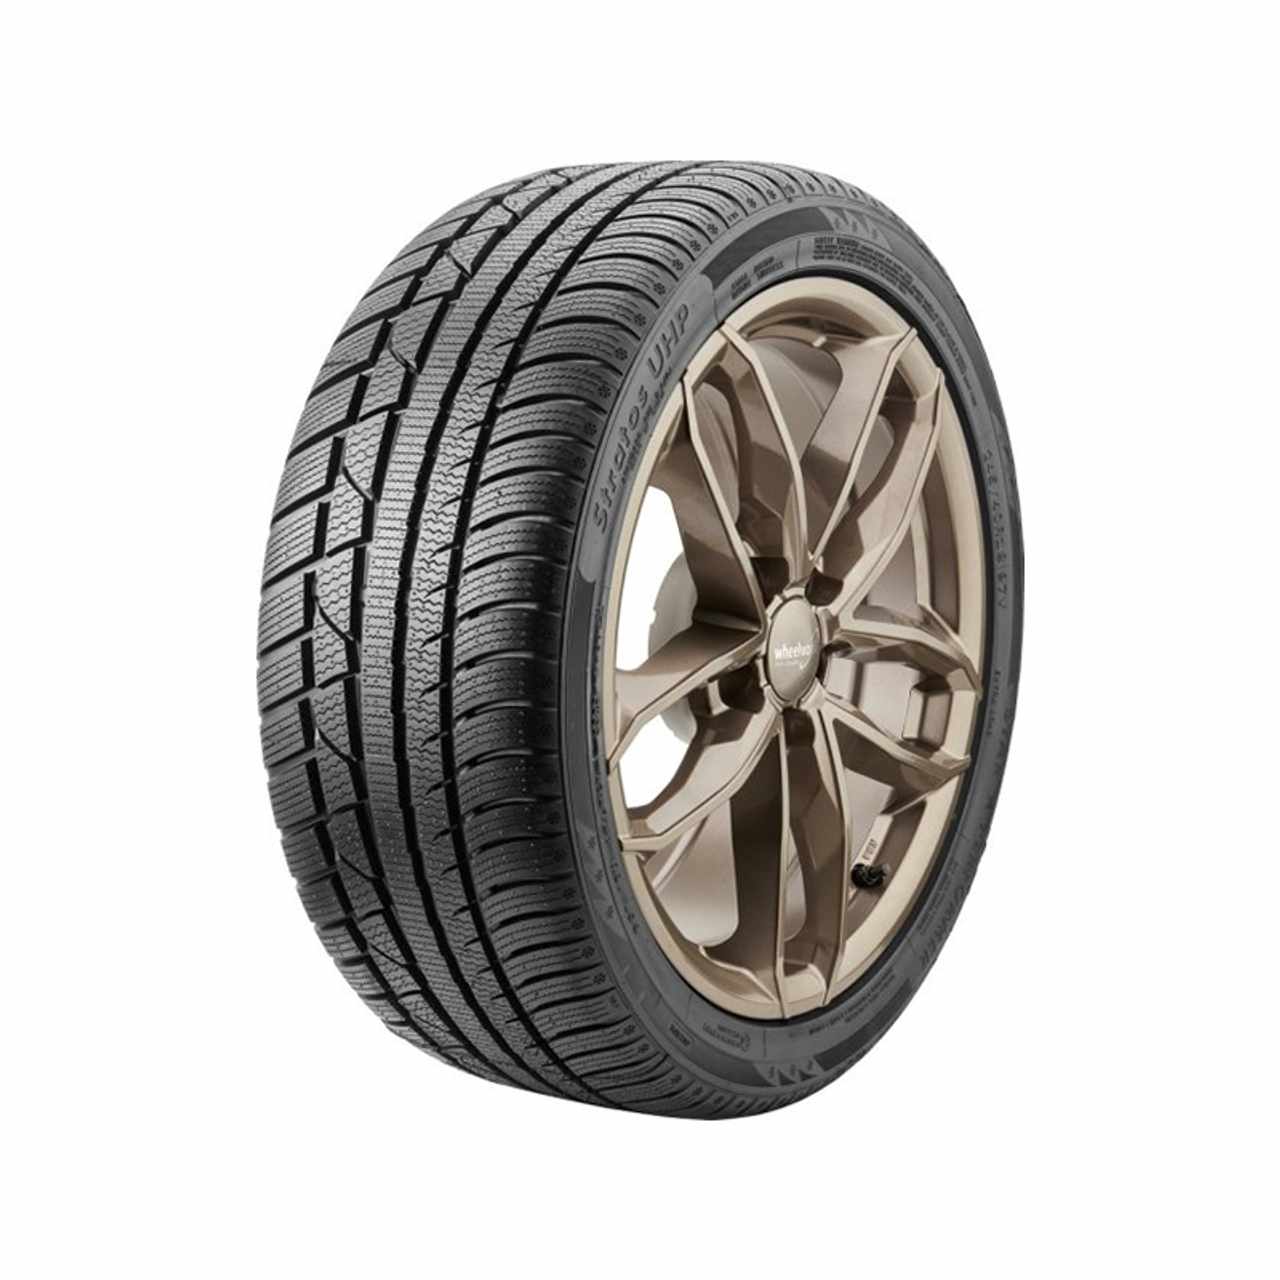 STAR PERFORMER STRATOS UHP 235/55R17 103V BSW XL